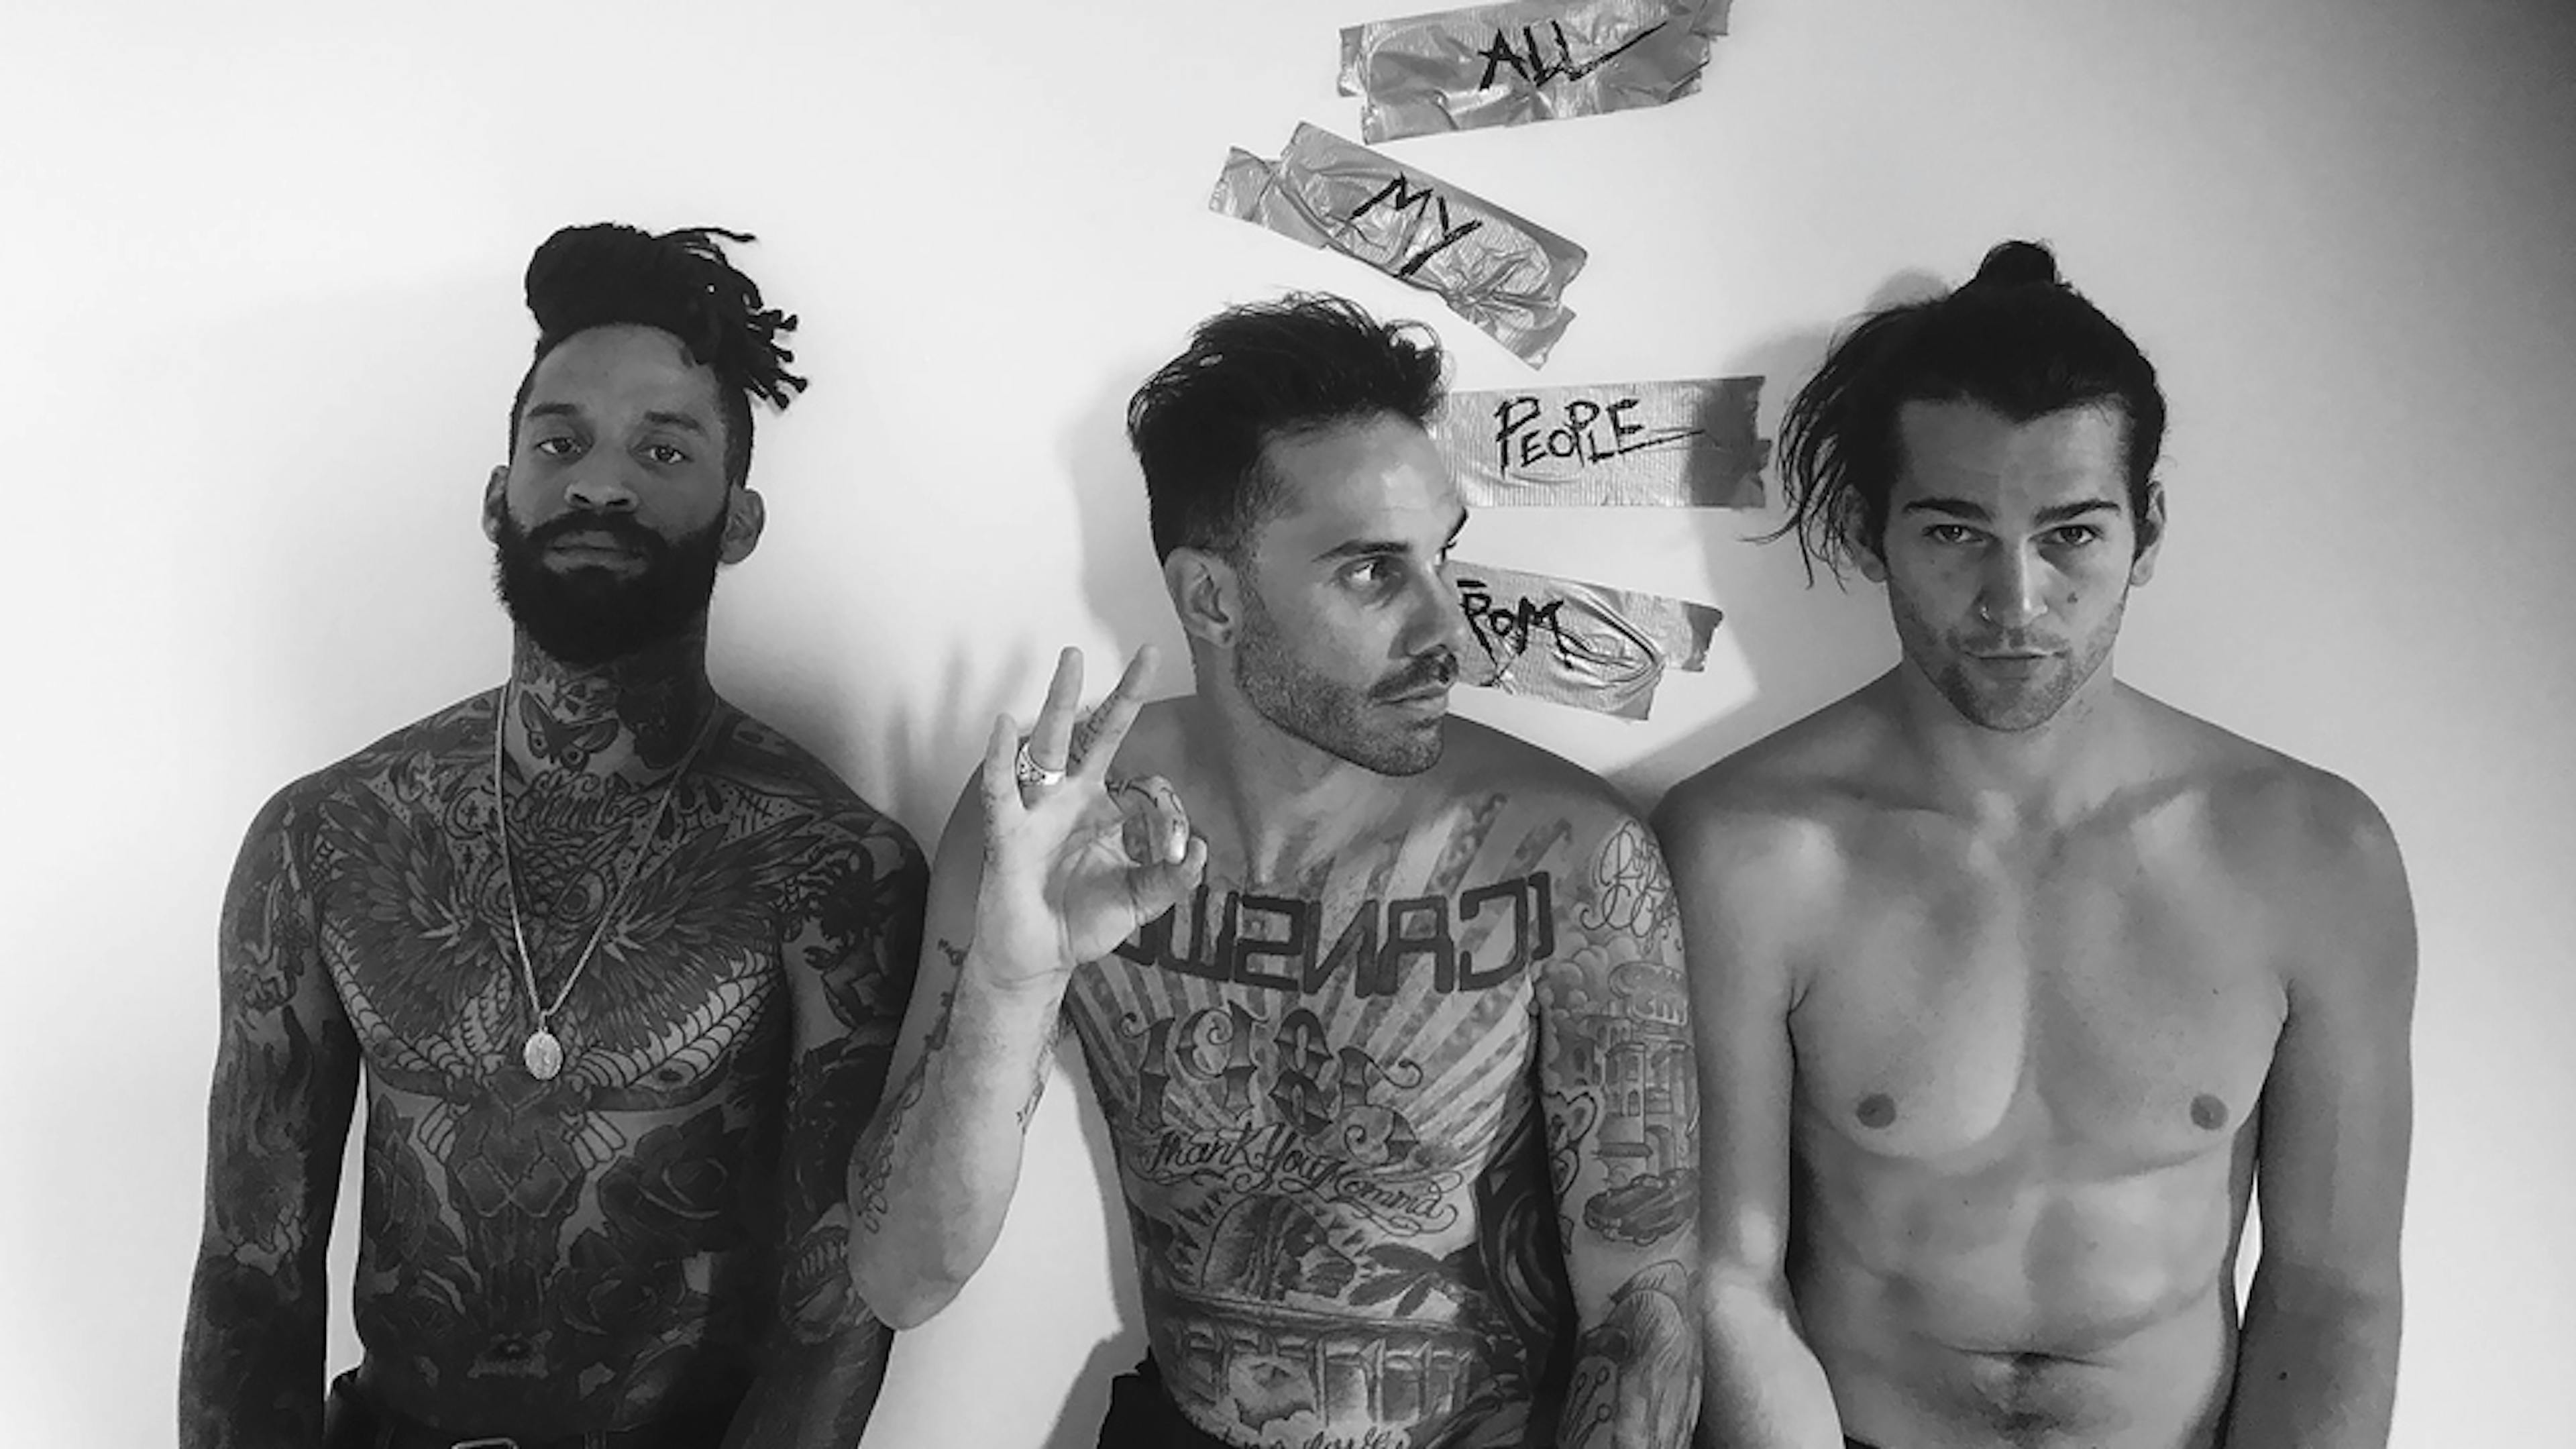 FEVER 333: "We’re Speaking With The People, Not For Them"